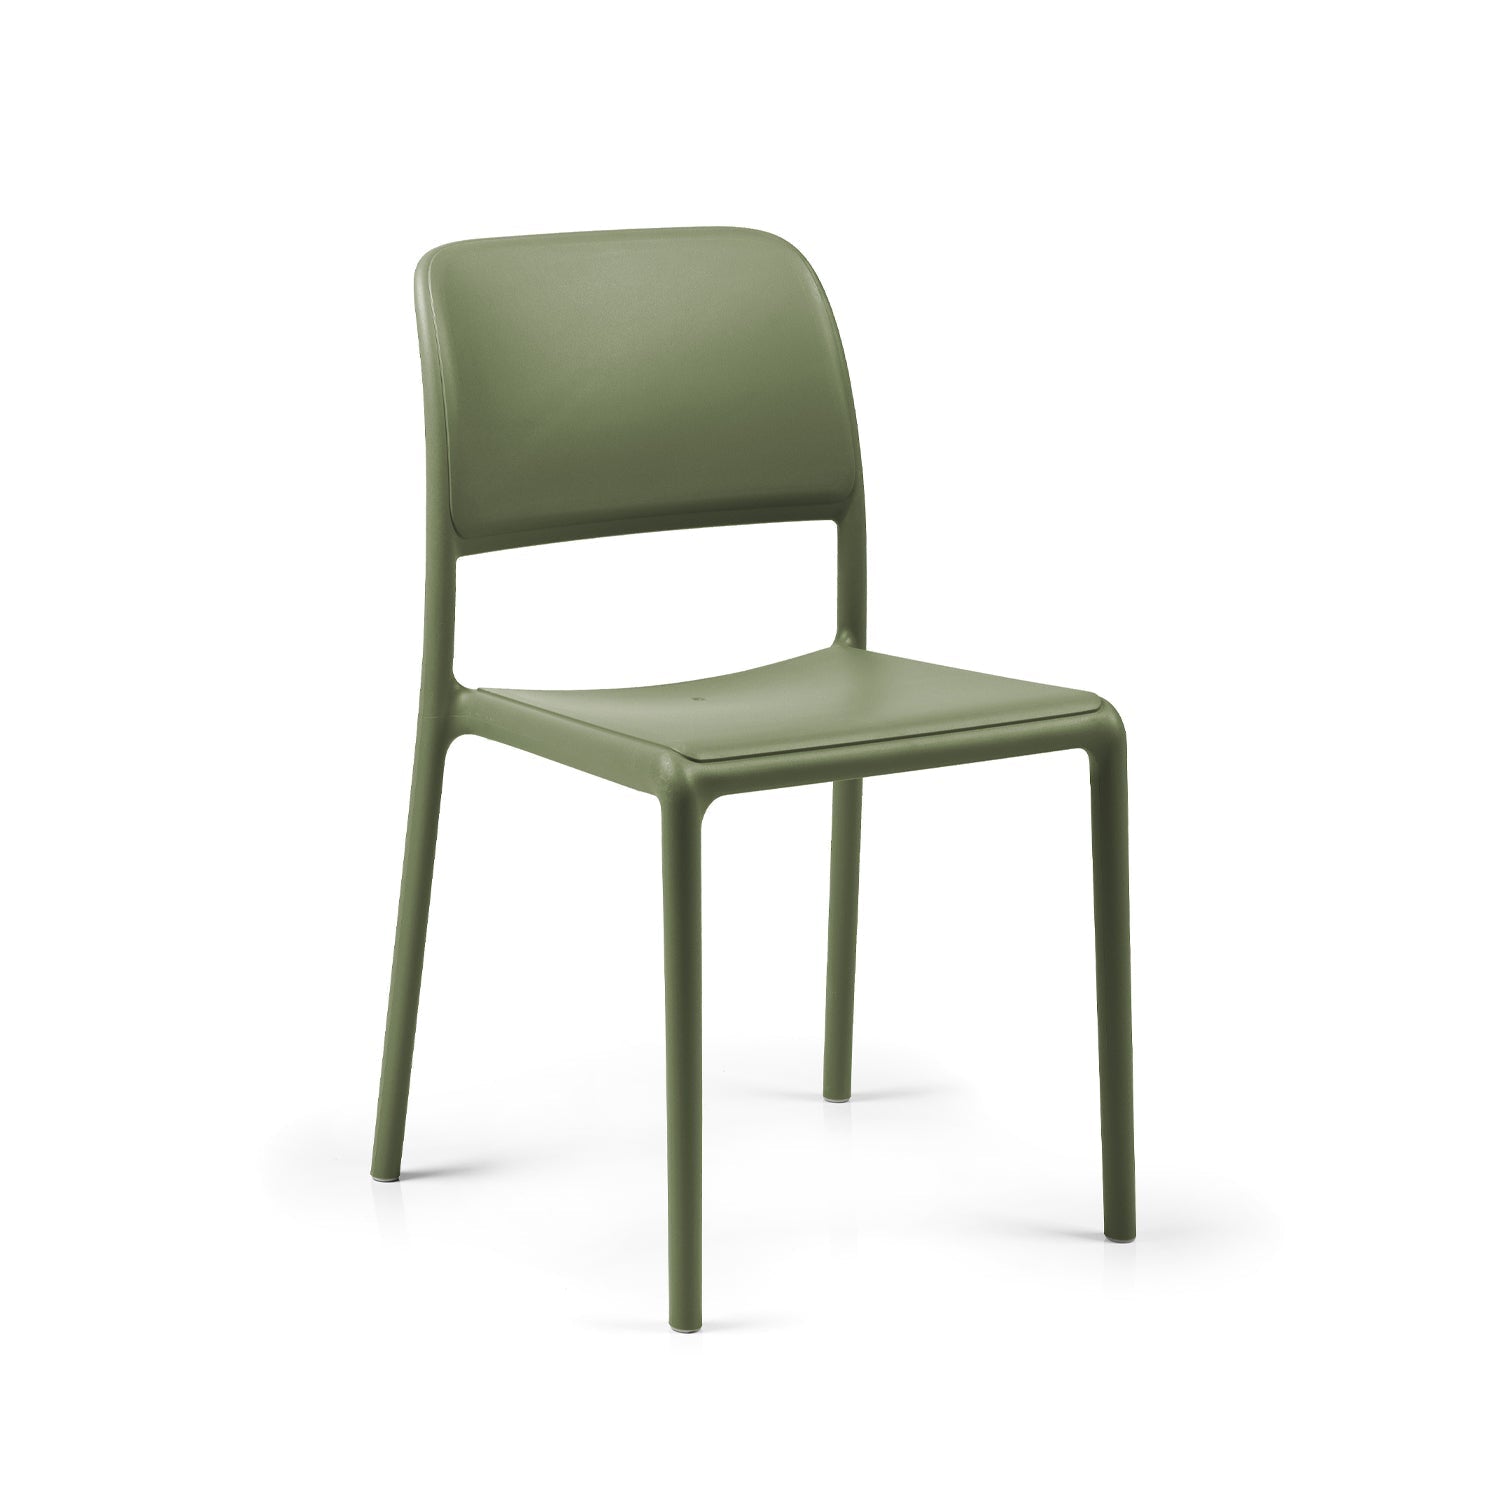 Riva Bistro Garden Chair By Nardi In Olive